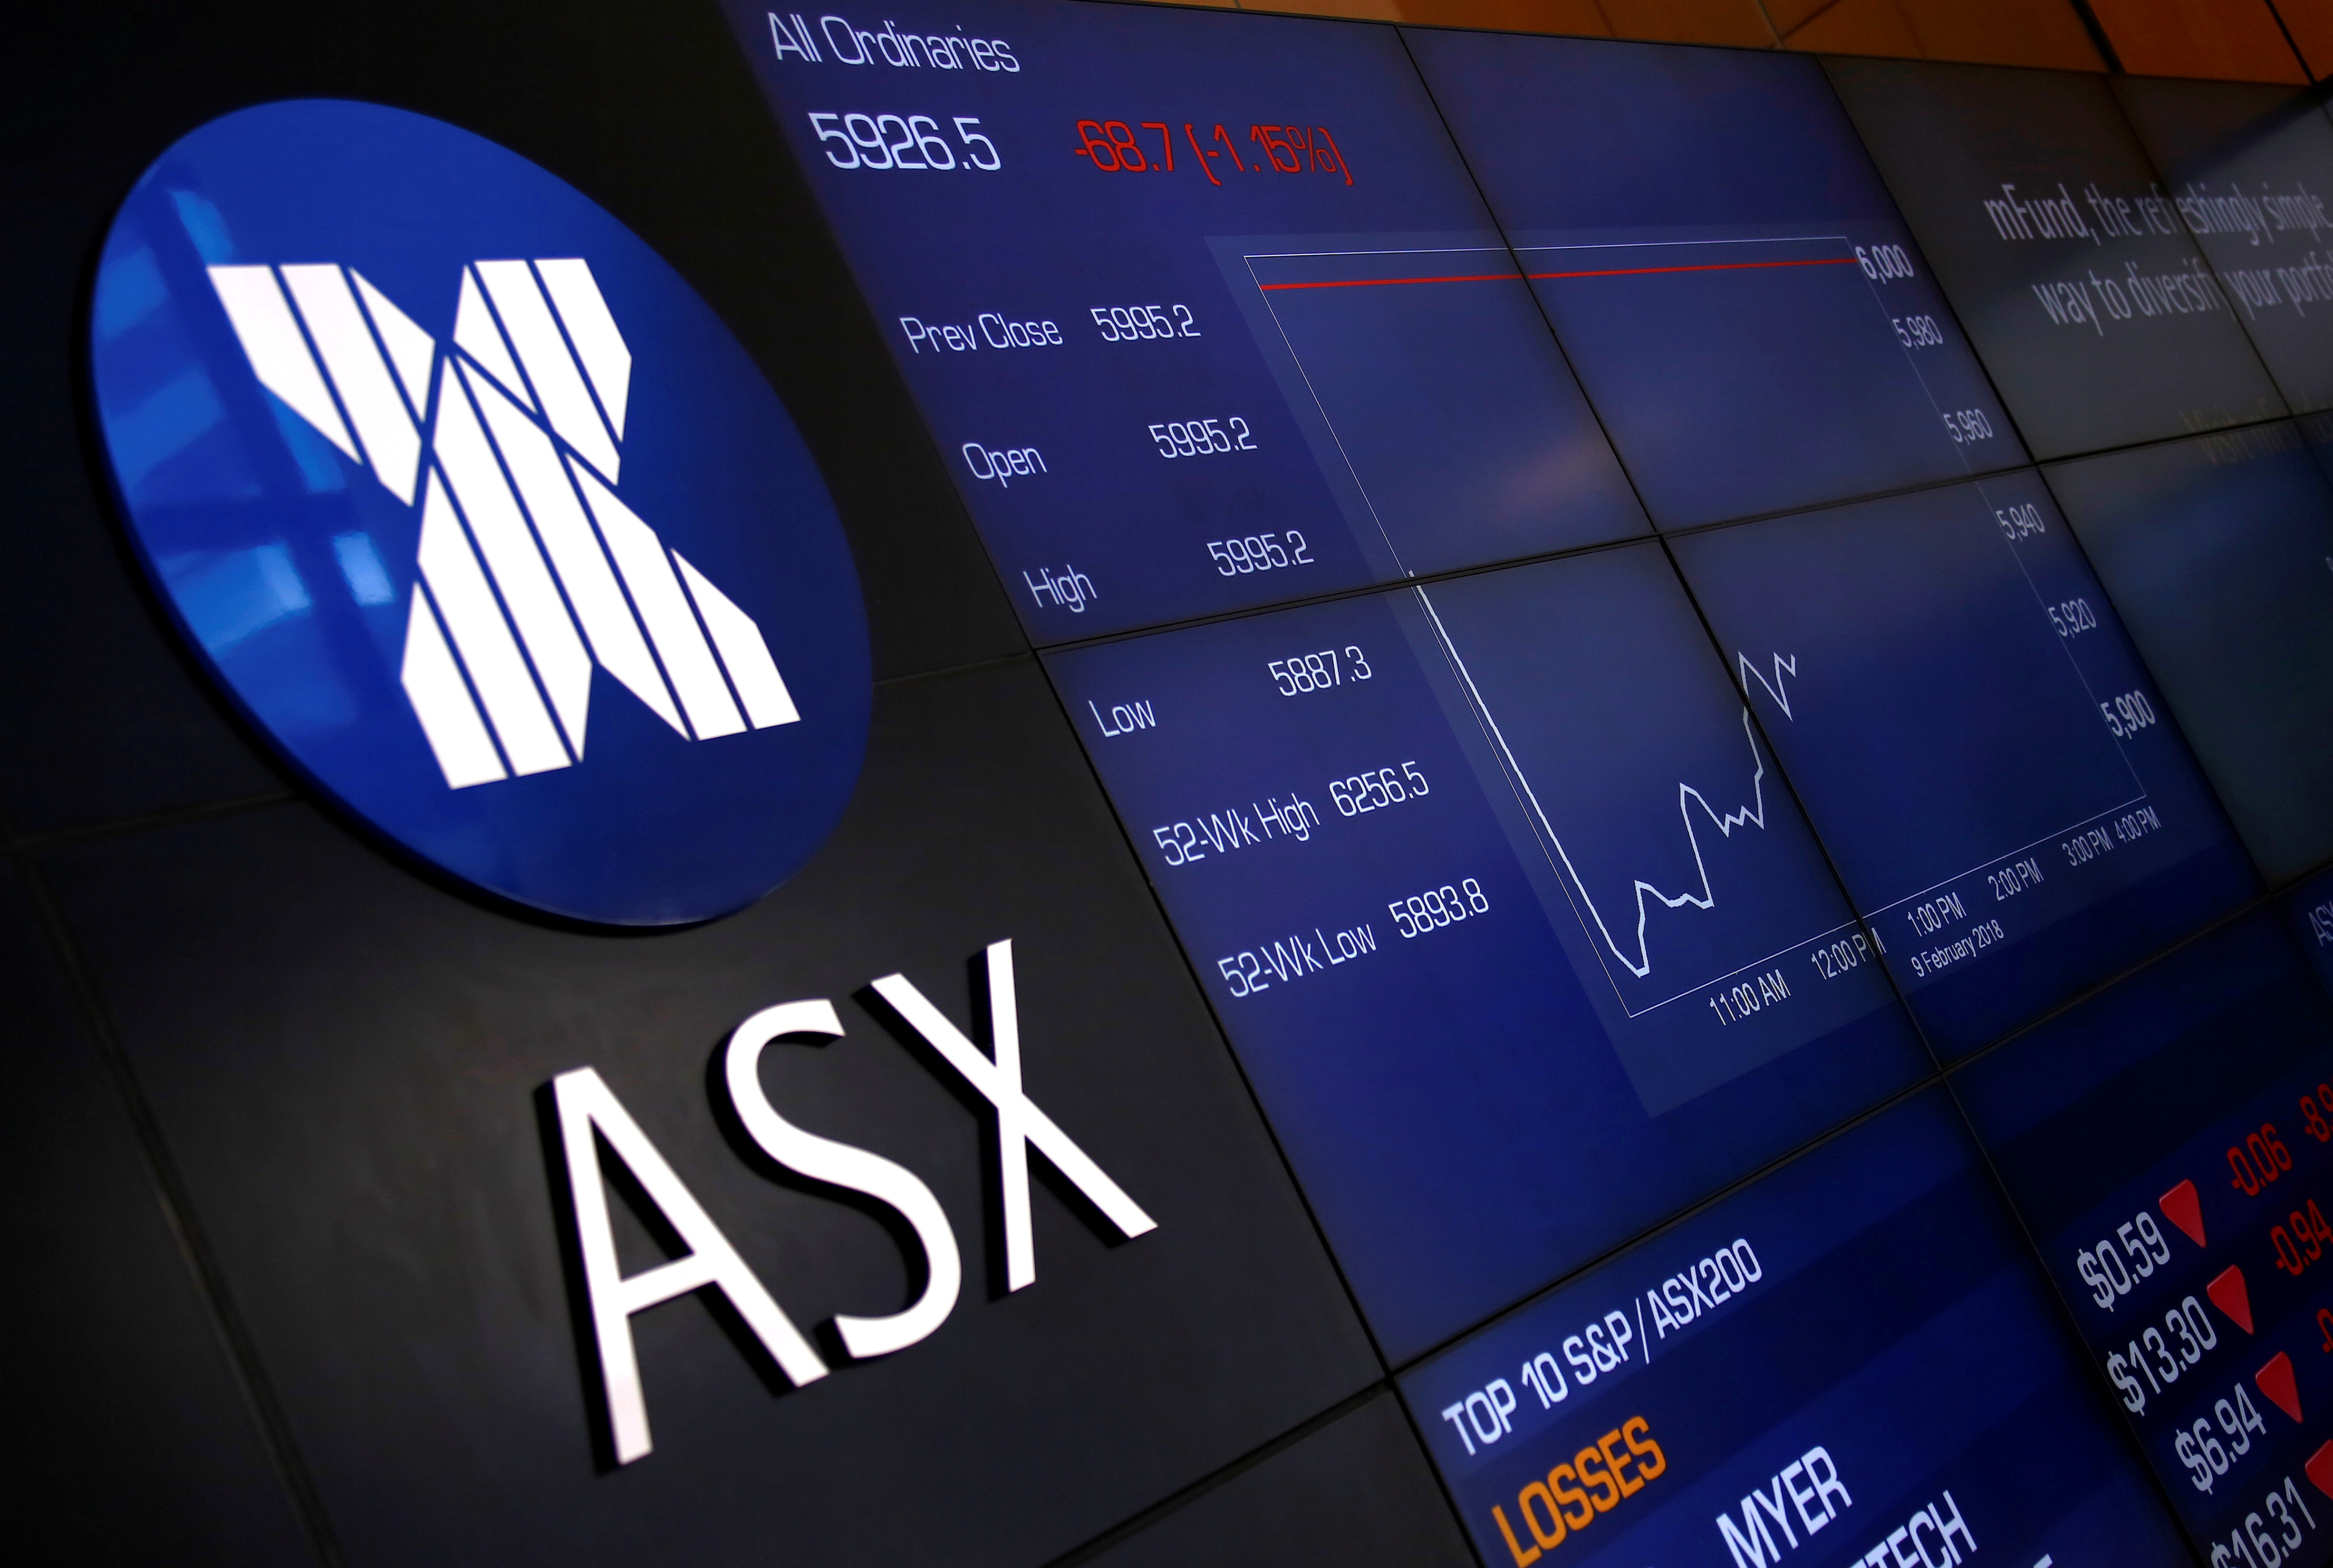 A board displaying stock prices is seen at the Australian Securities Exchange in Sydney